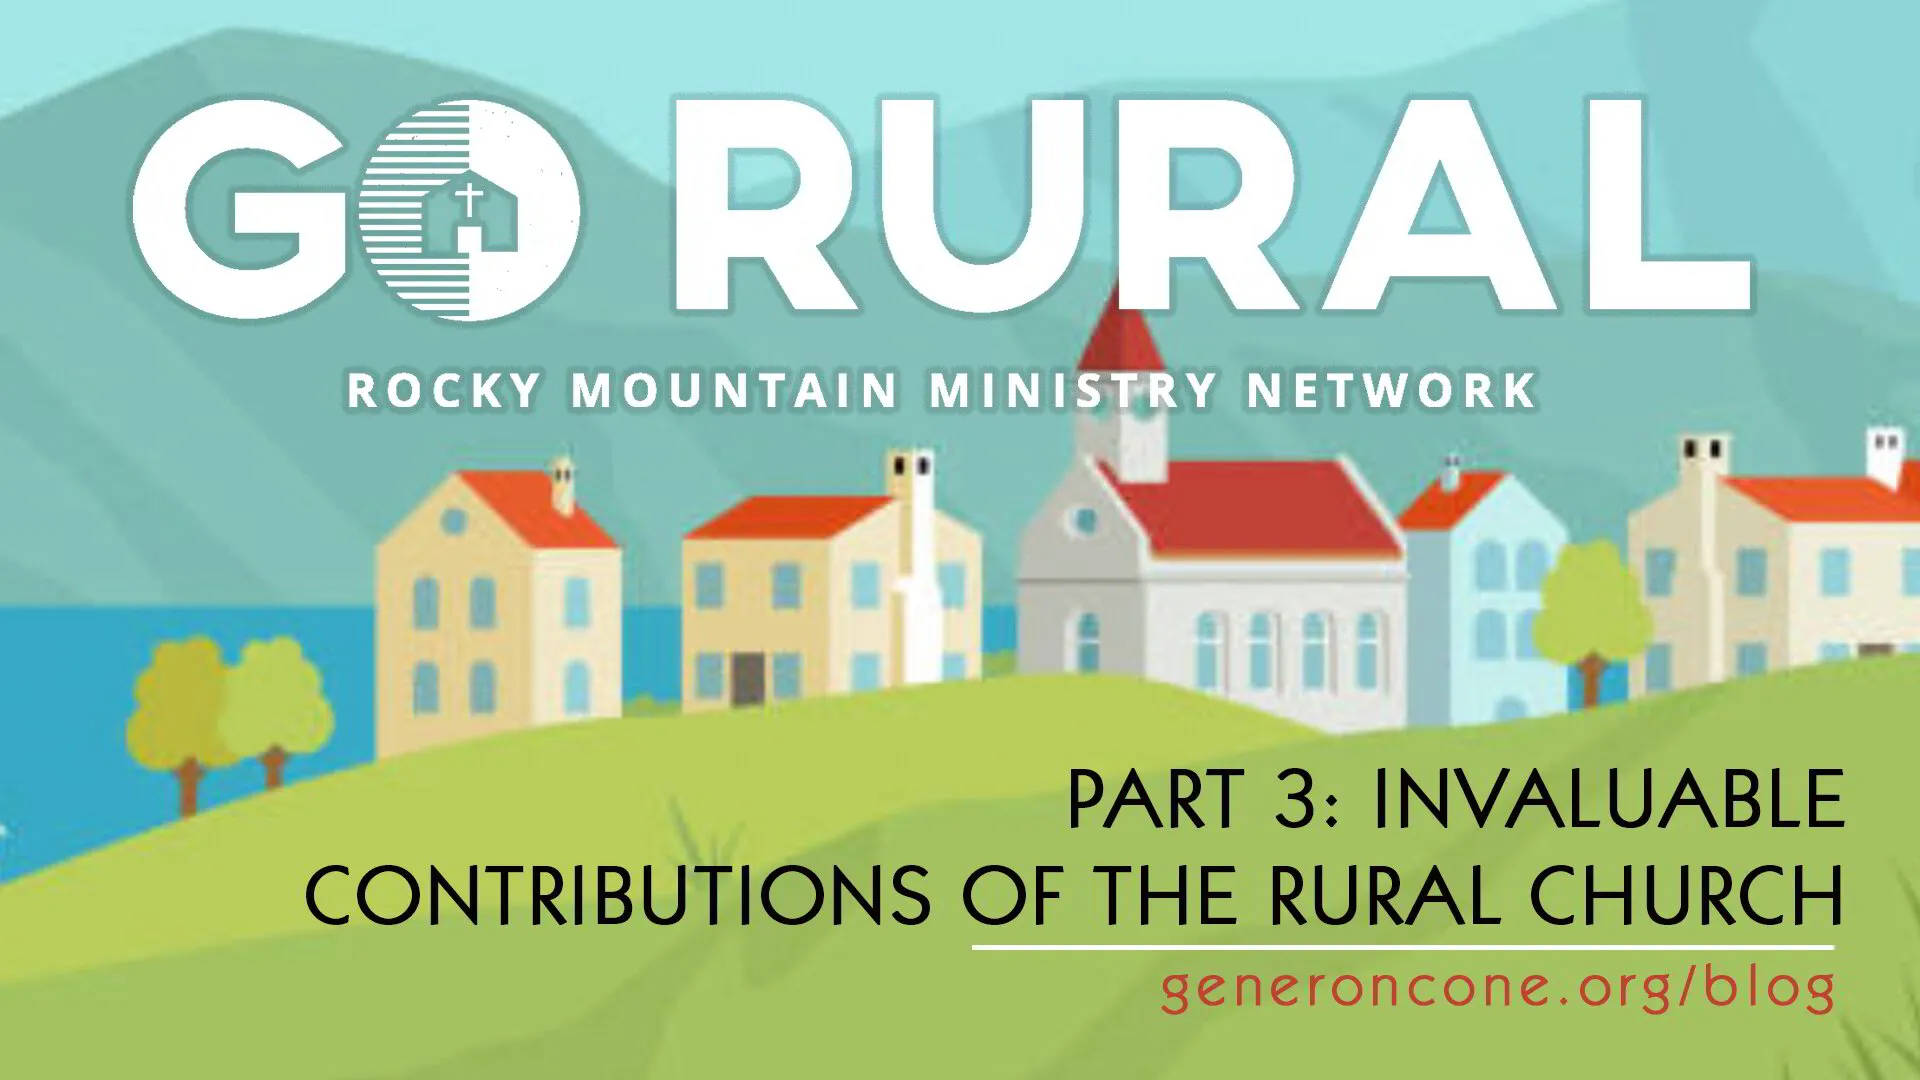 Go Rural, Part 3: Invaluable Contributions of the Rural Church